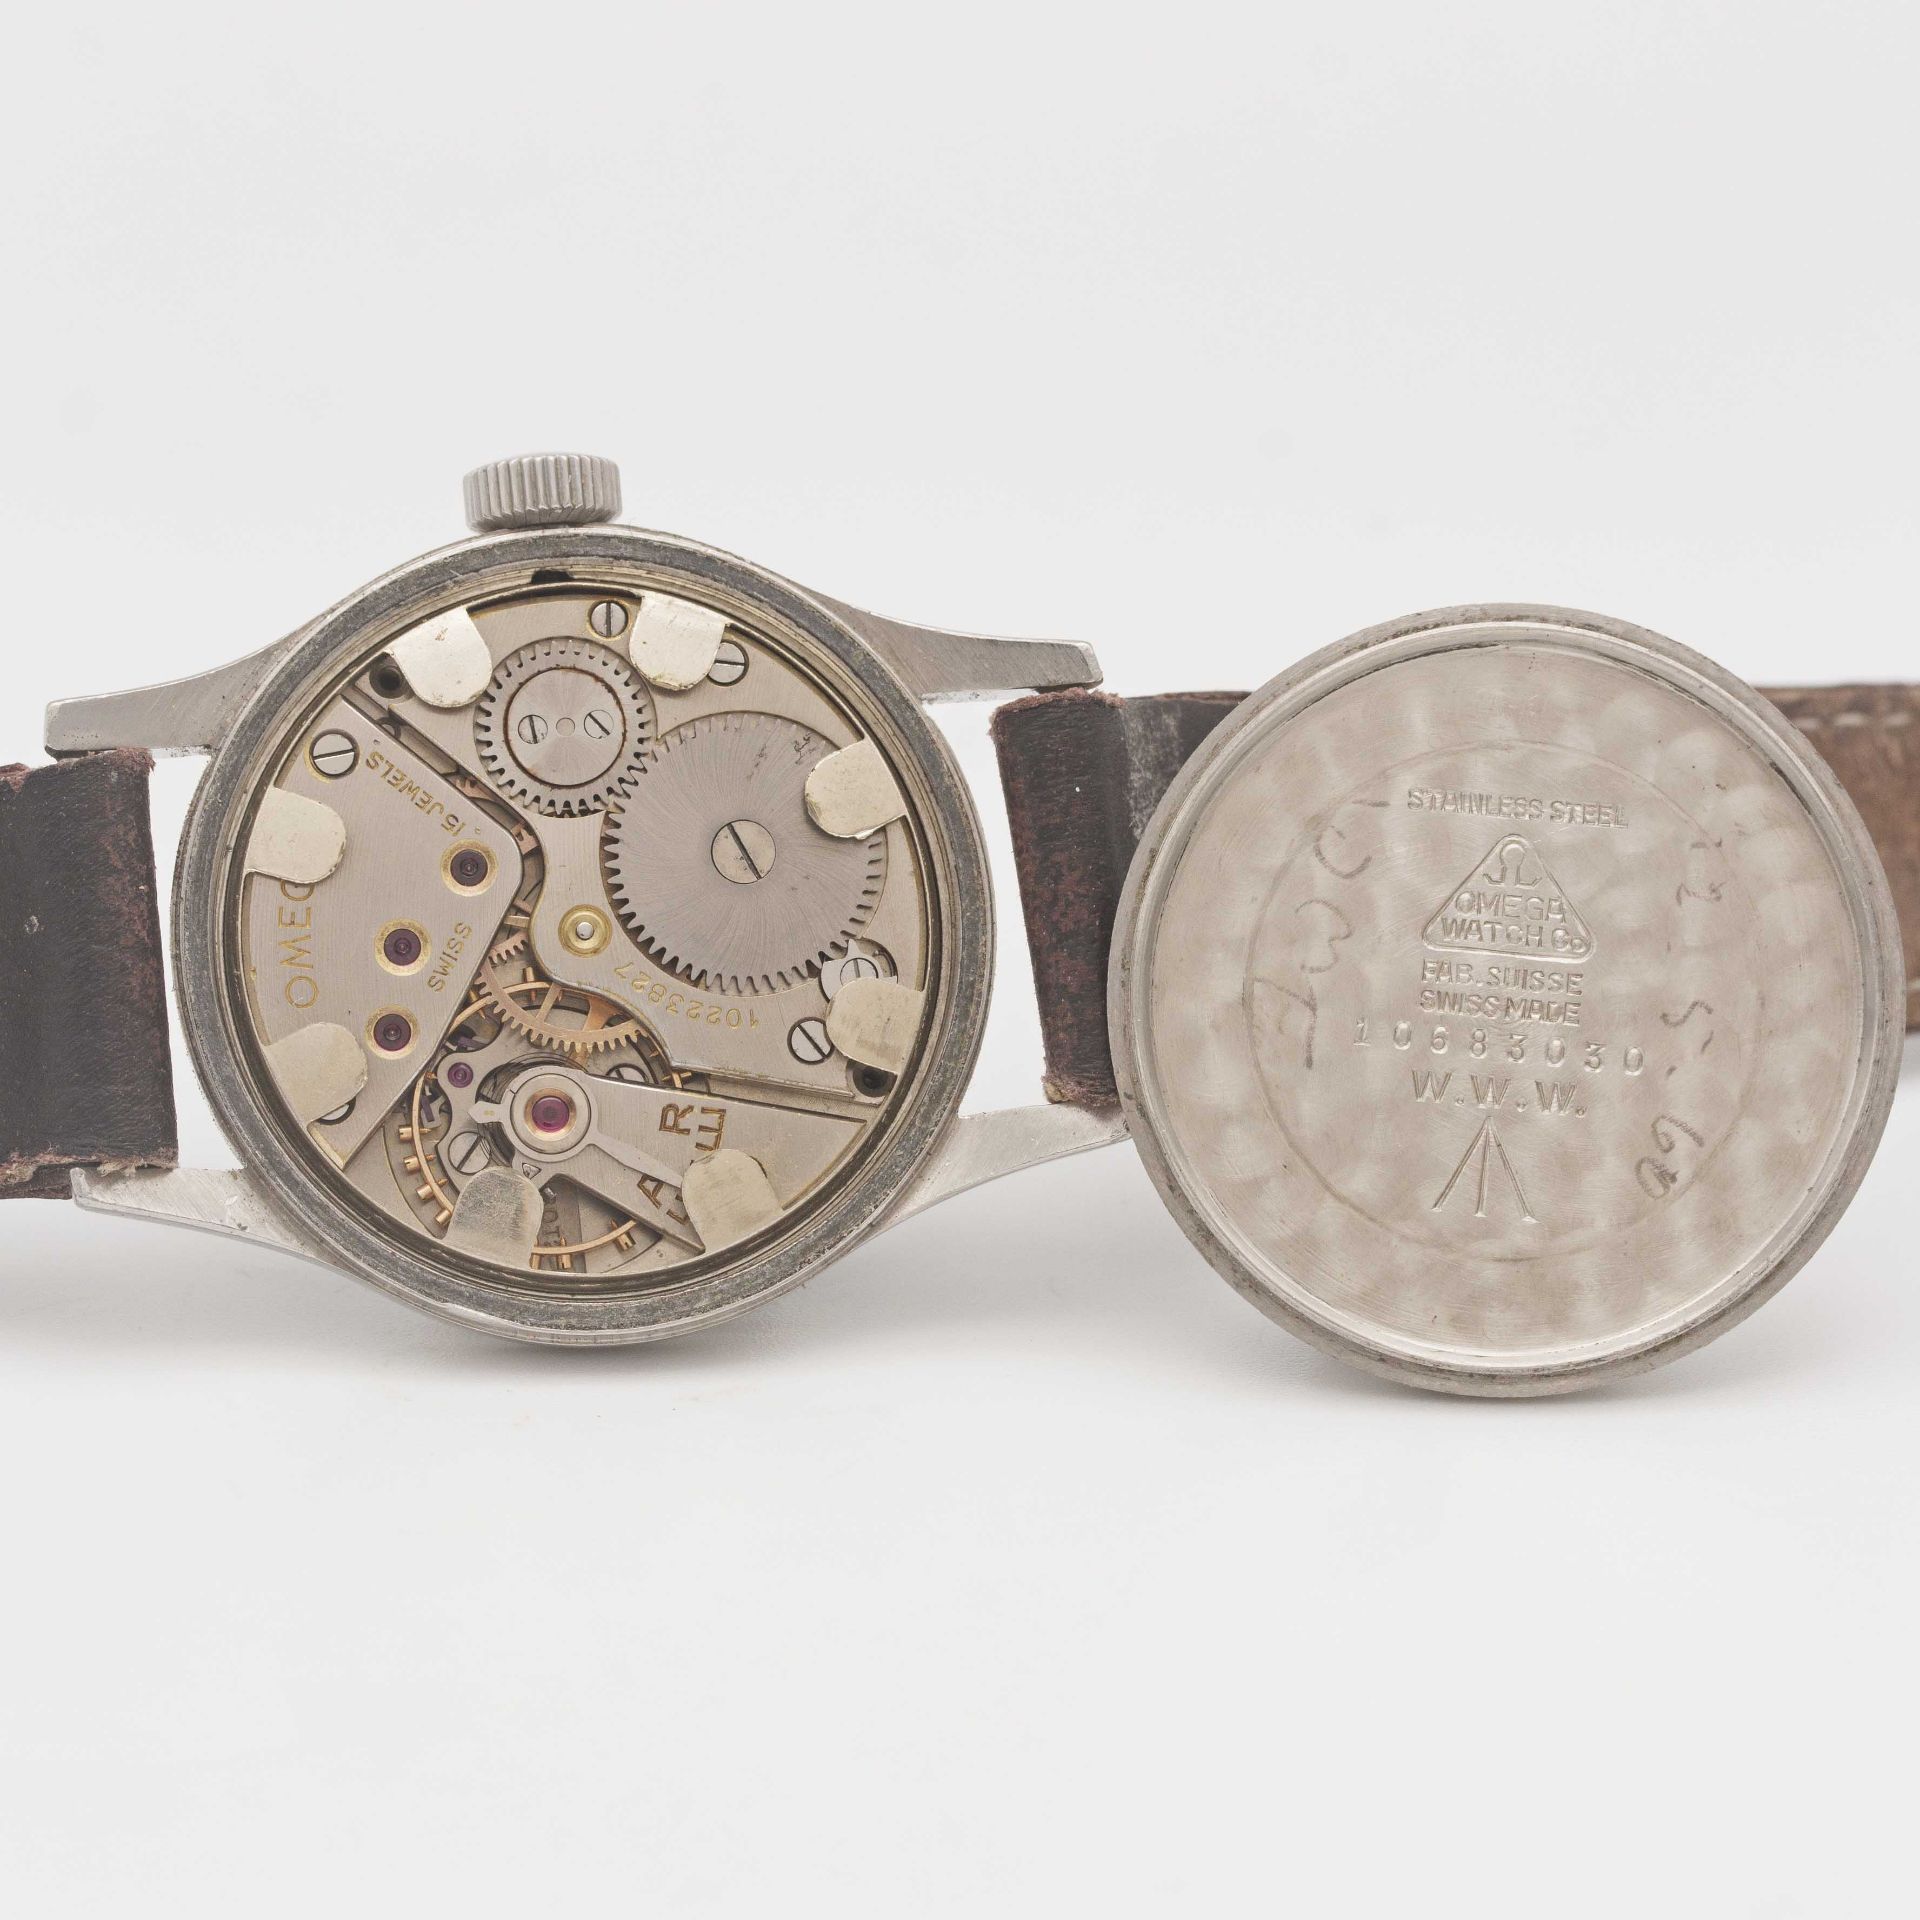 A GENTLEMAN'S STAINLESS STEEL BRITISH MILITARY OMEGA W.W.W. WRIST WATCH CIRCA 1945, PART OF THE " - Image 7 of 9